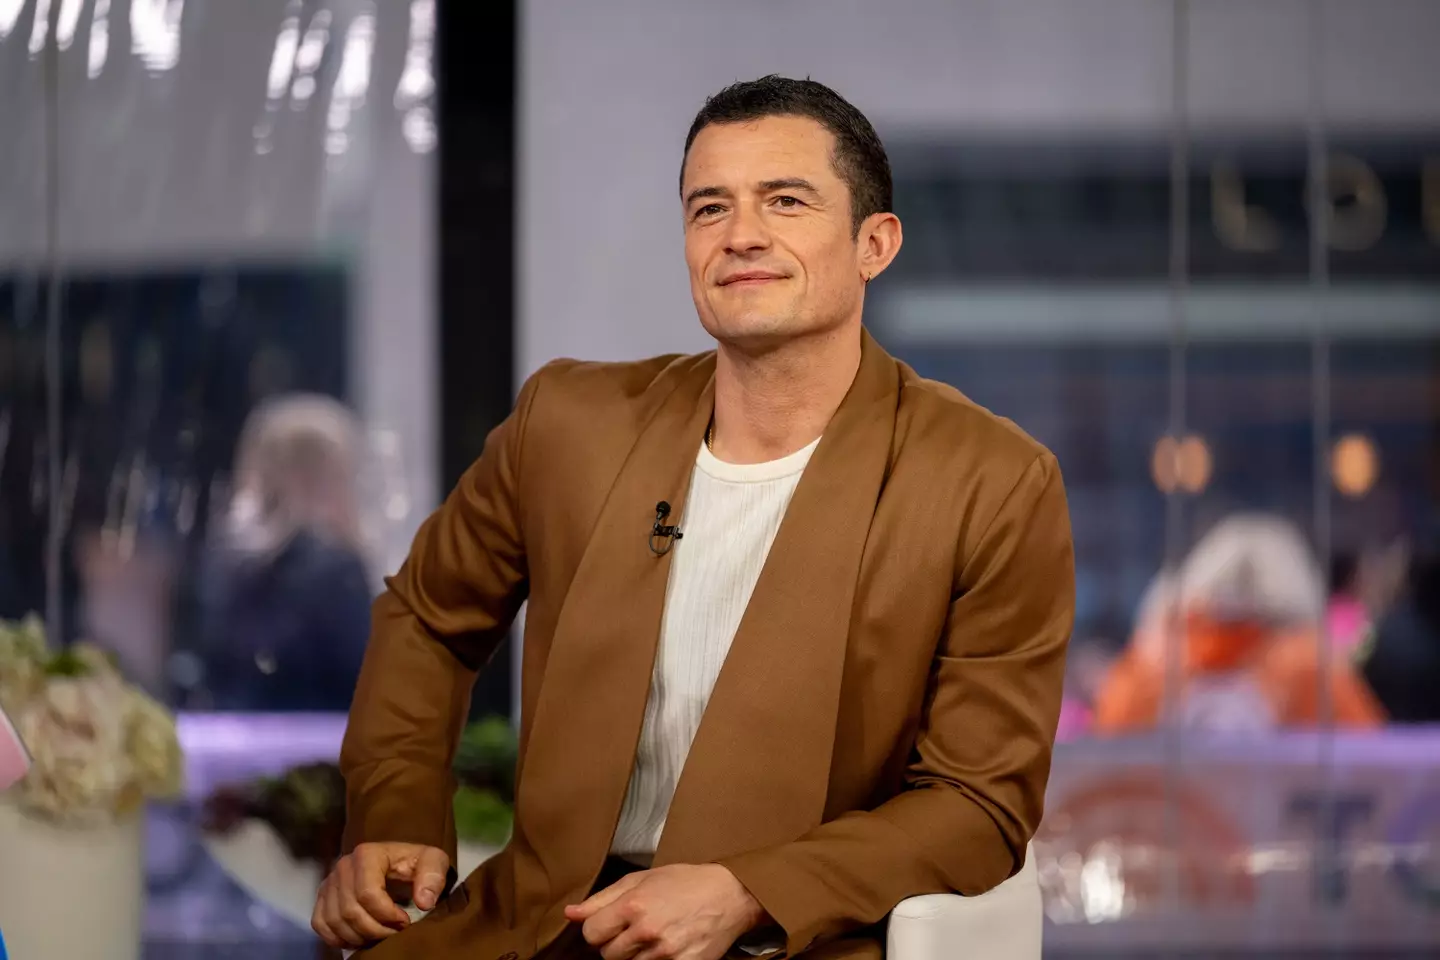 Orlando Bloom 'tries to forget' about Troy. (Nathan Congleton/NBC via Getty Images)